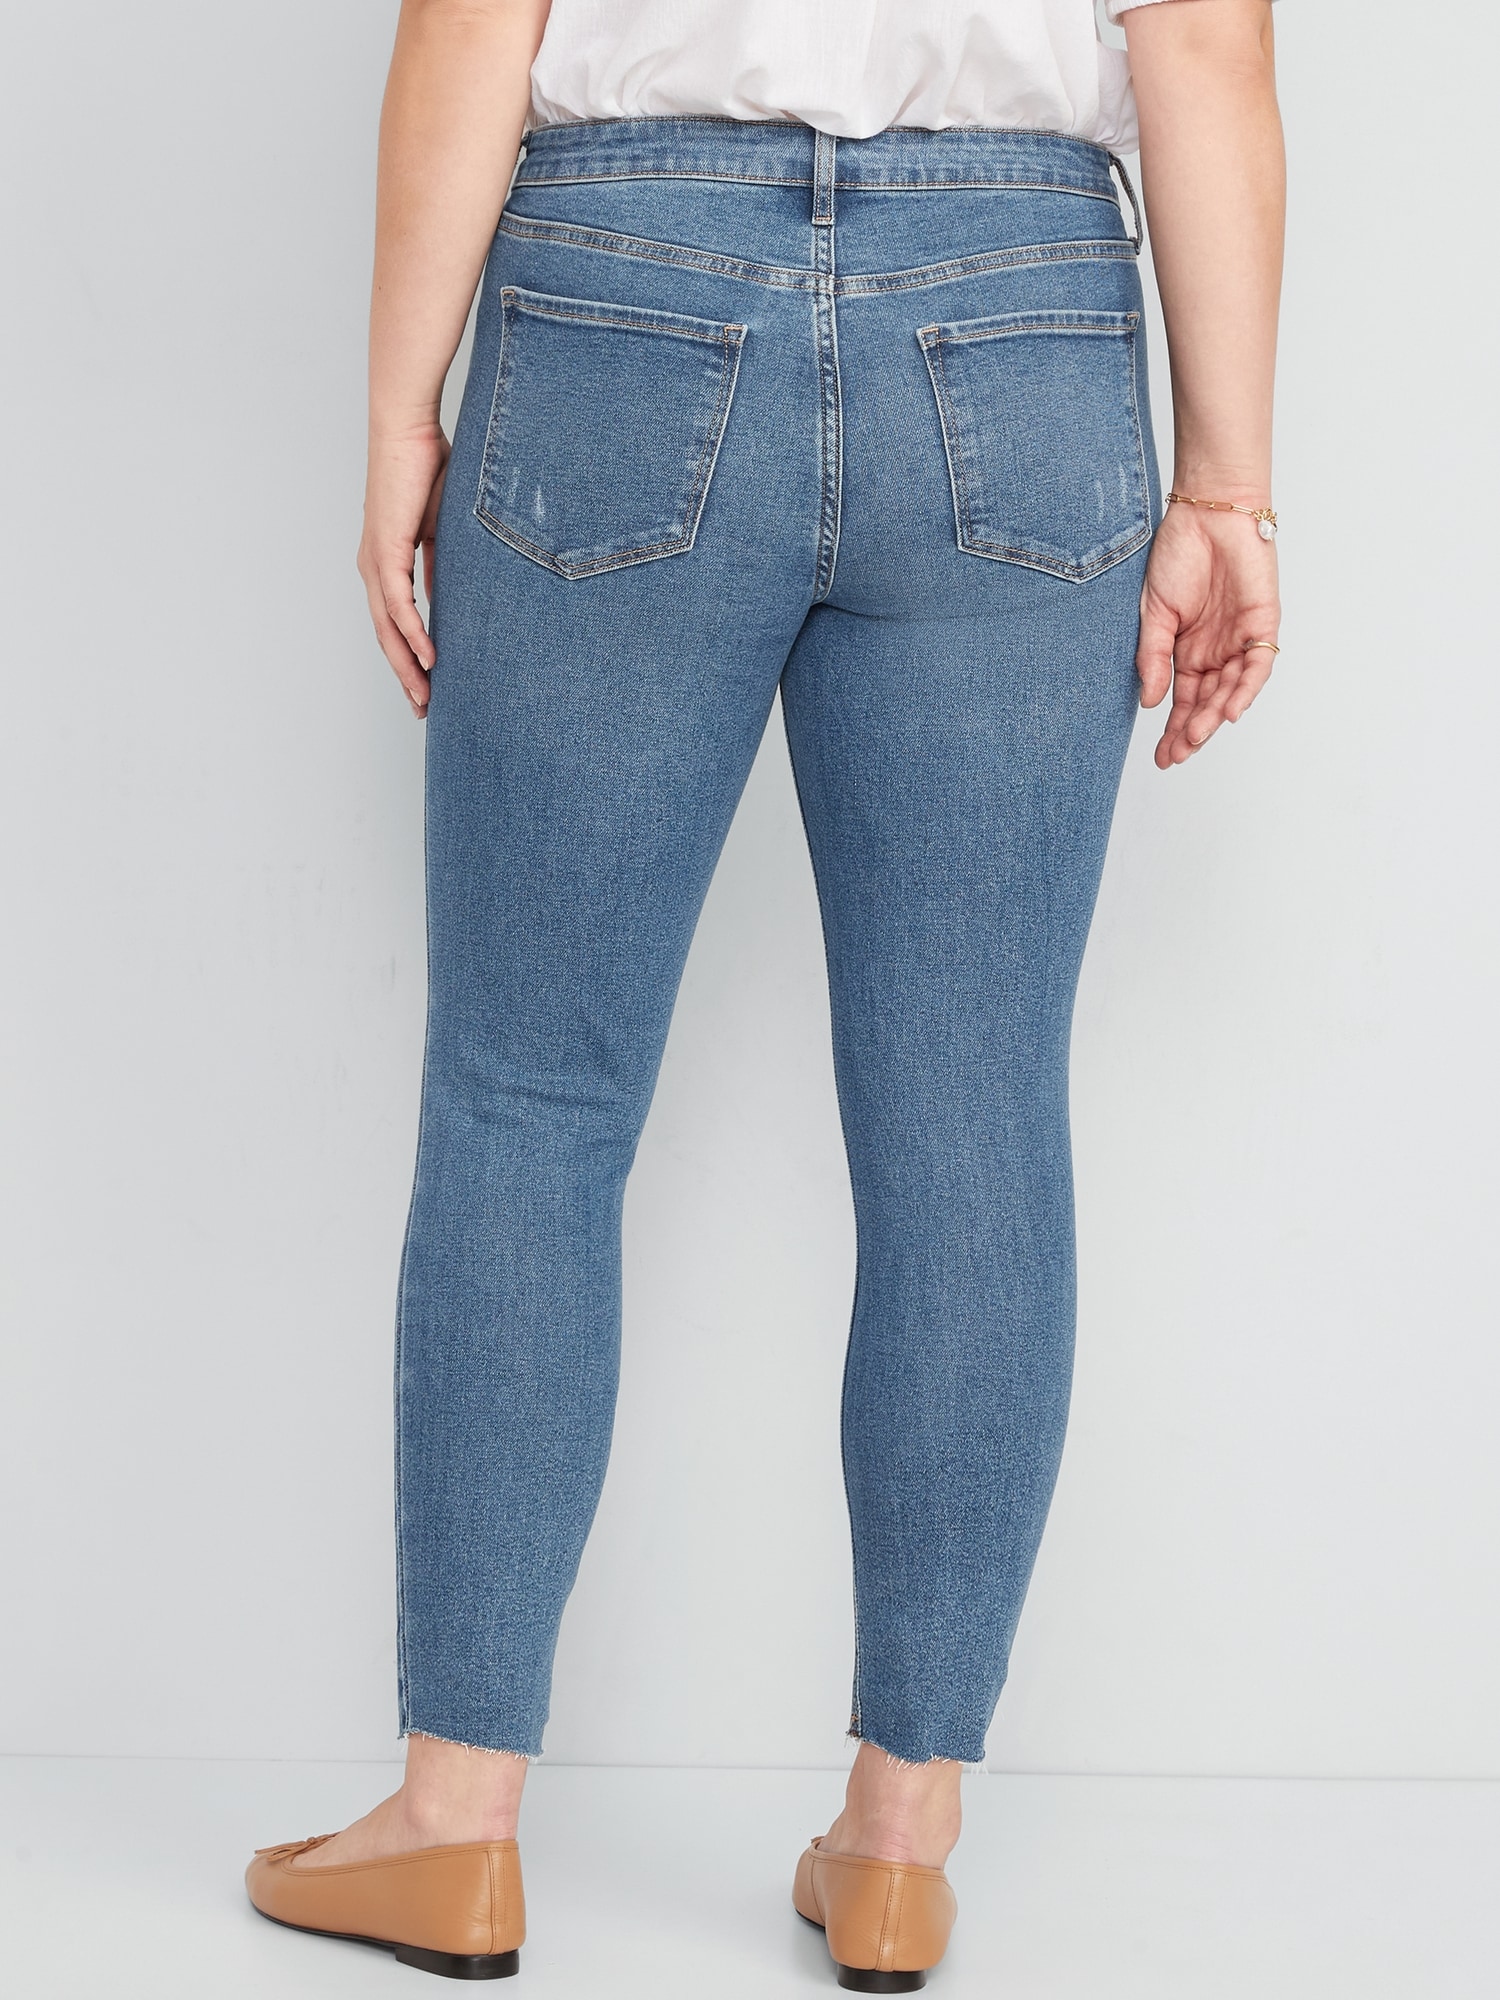 Old Navy, Jeans, Old Navy Midrise Rockstar Superskinny Jeans For Women